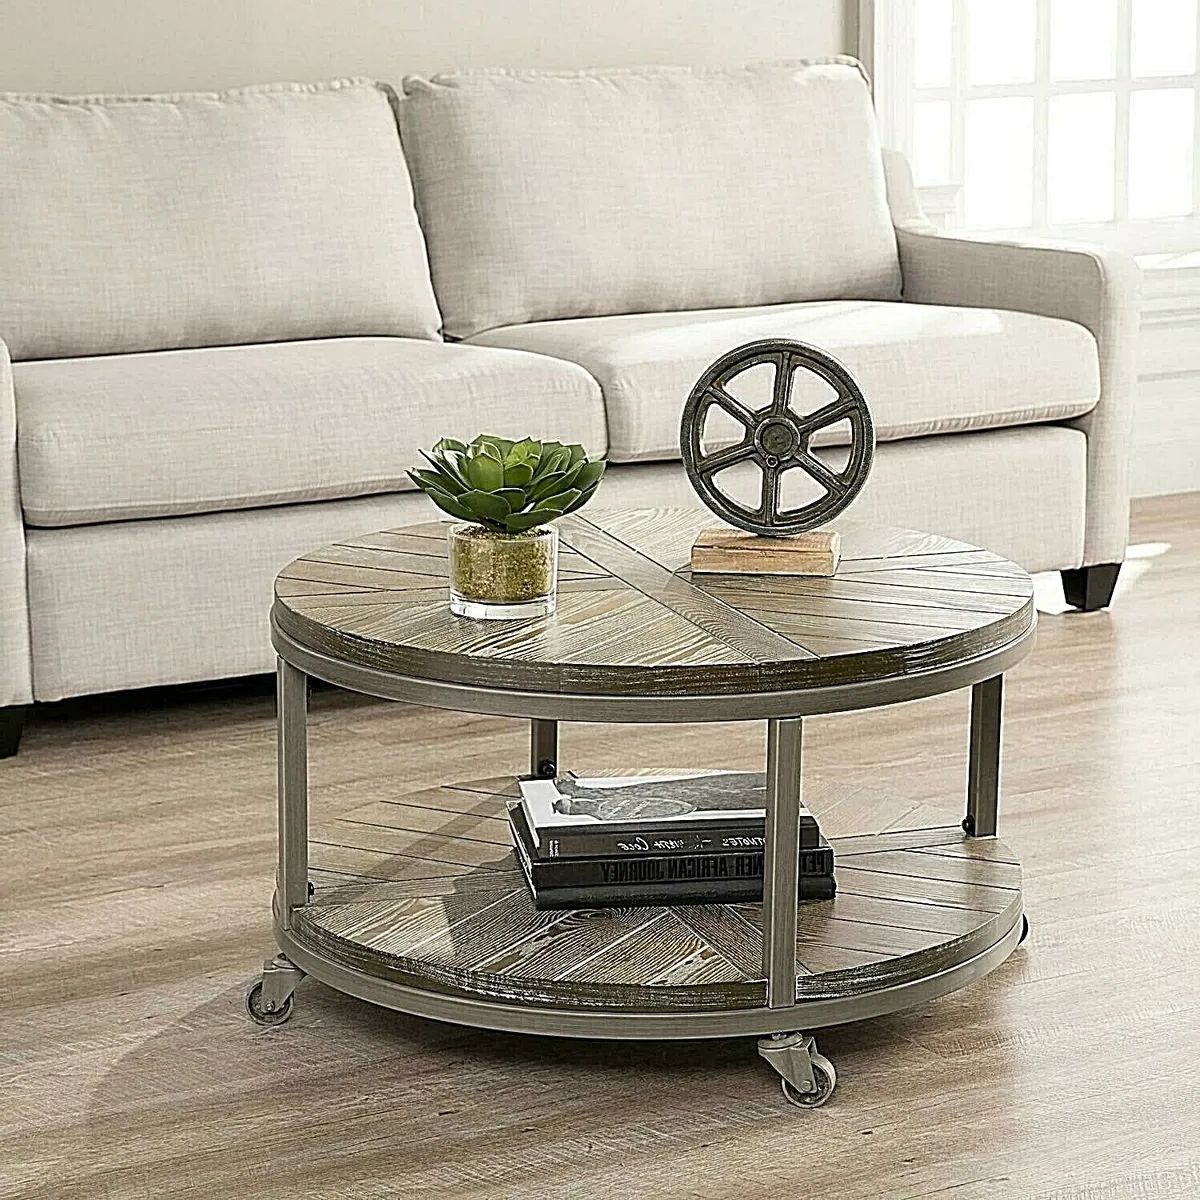 Most Recent Coffee Tables With Casters Inside Rustic Industrial Round Coffee Table W/shelf & Casters Wheels, Distressed  Brown (View 6 of 10)